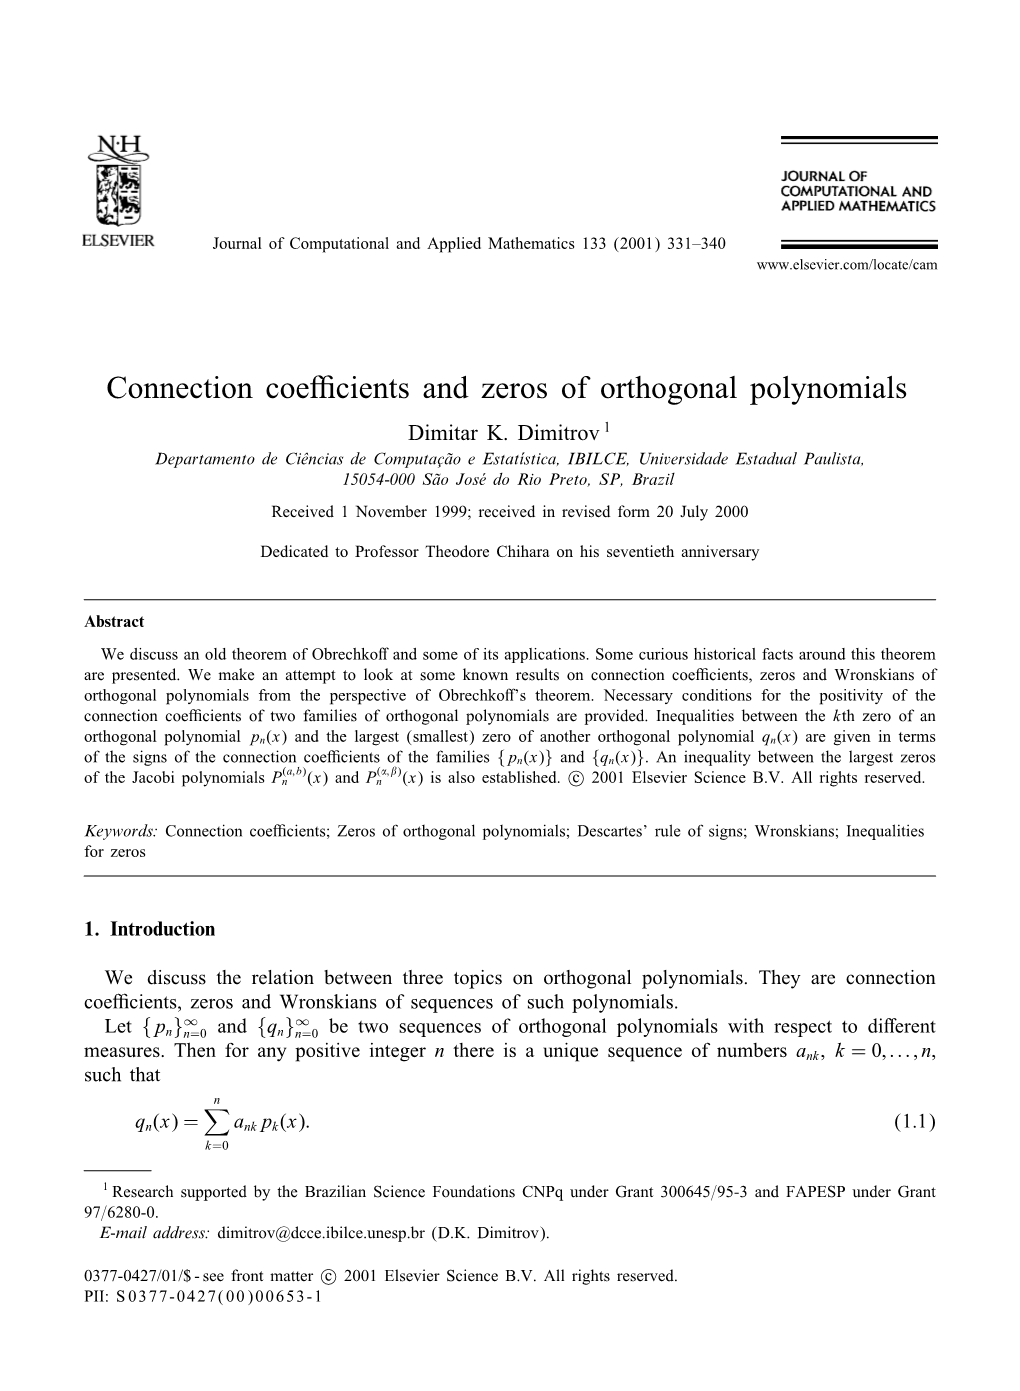 Connection Coe Cients and Zeros of Orthogonal Polynomials